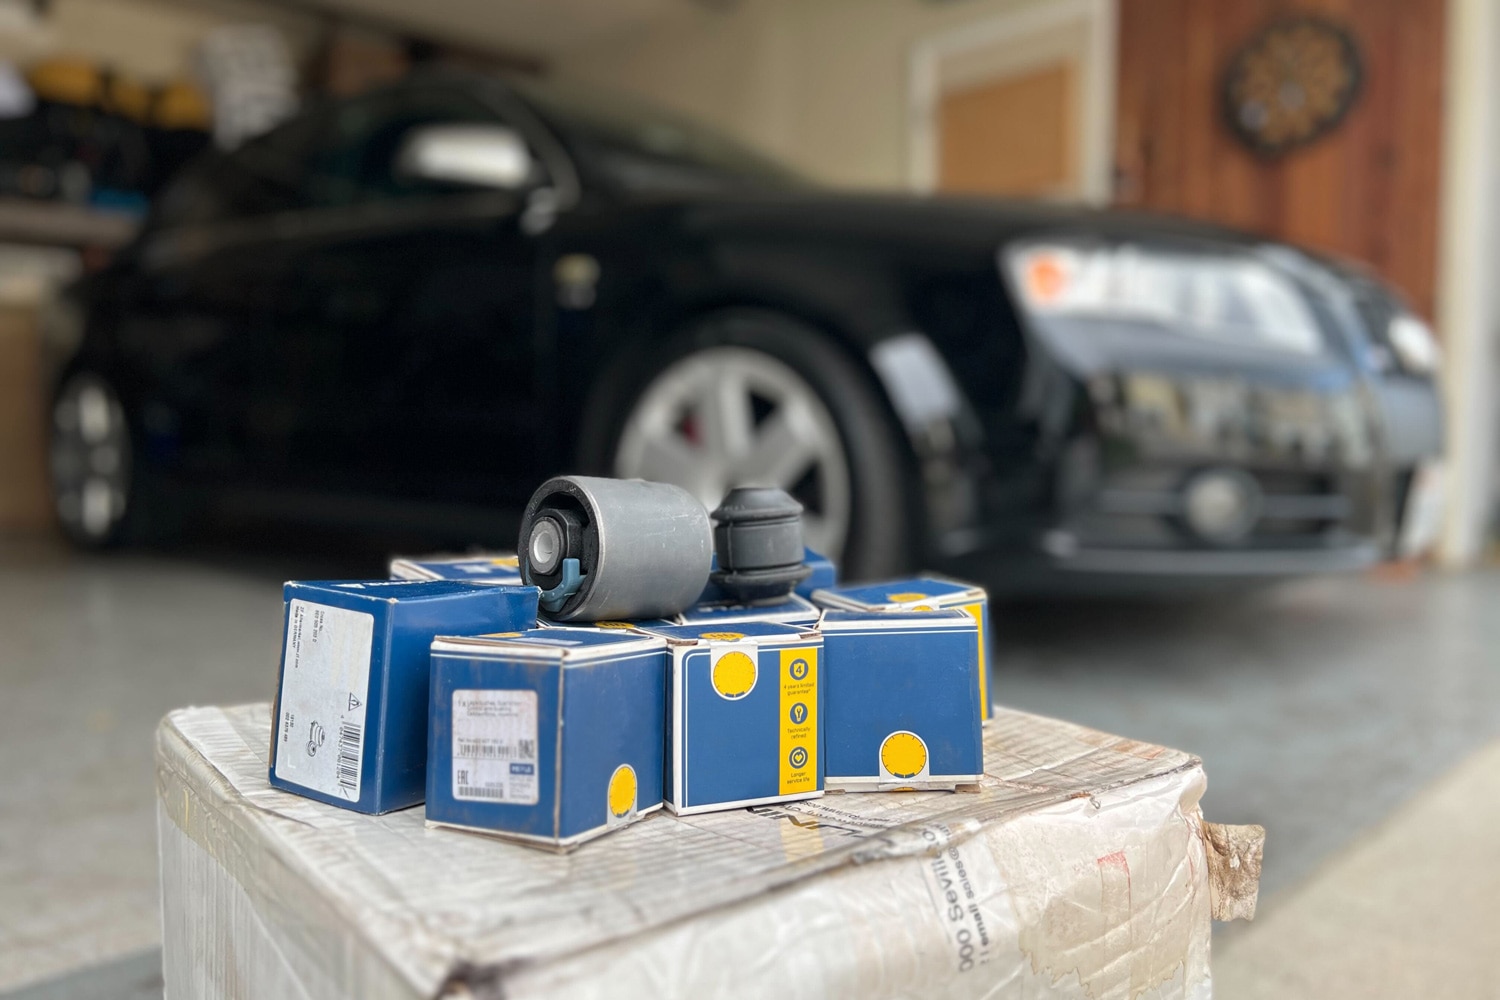  Several suspension bushings and boxes are stacked in front of black car in a garage